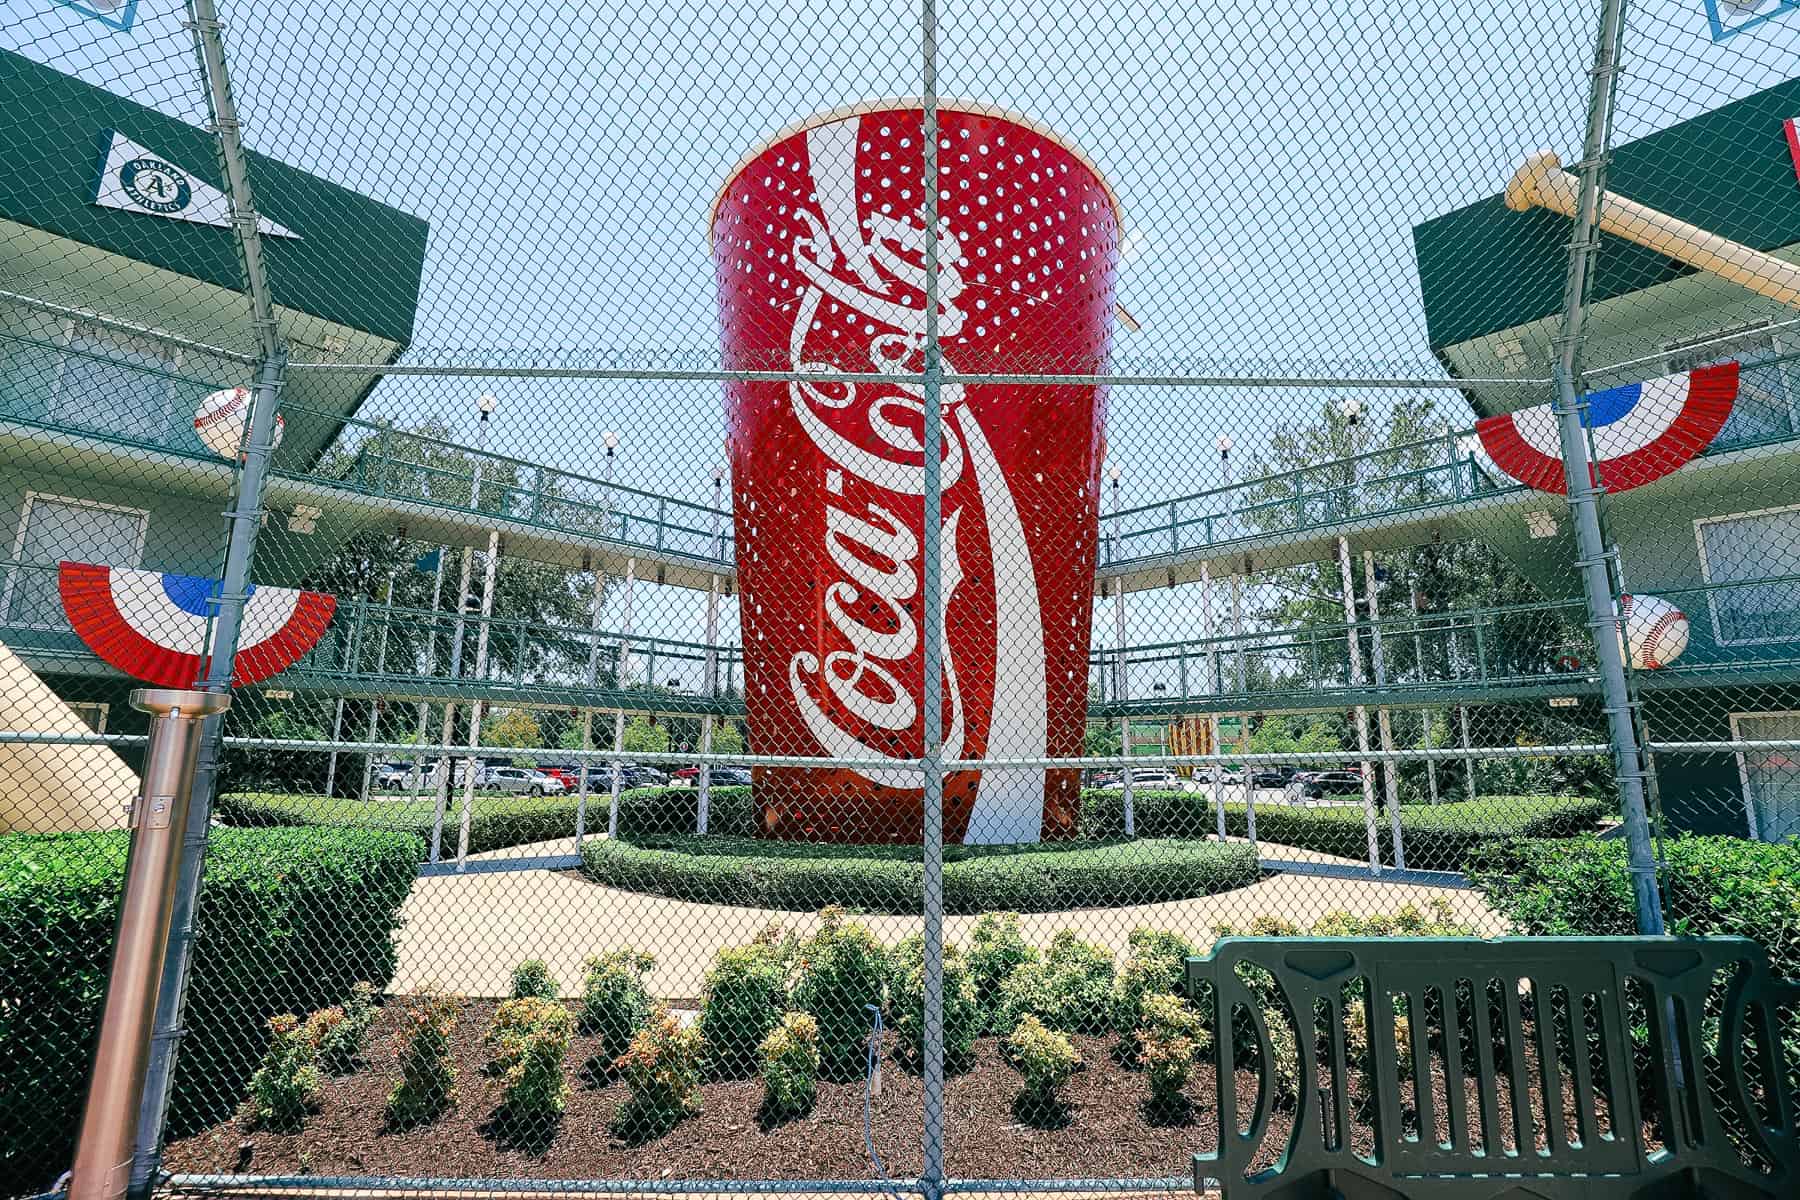 the stands surround the pool at All-Star Sports with a giant Coca-Cola cup staircase 